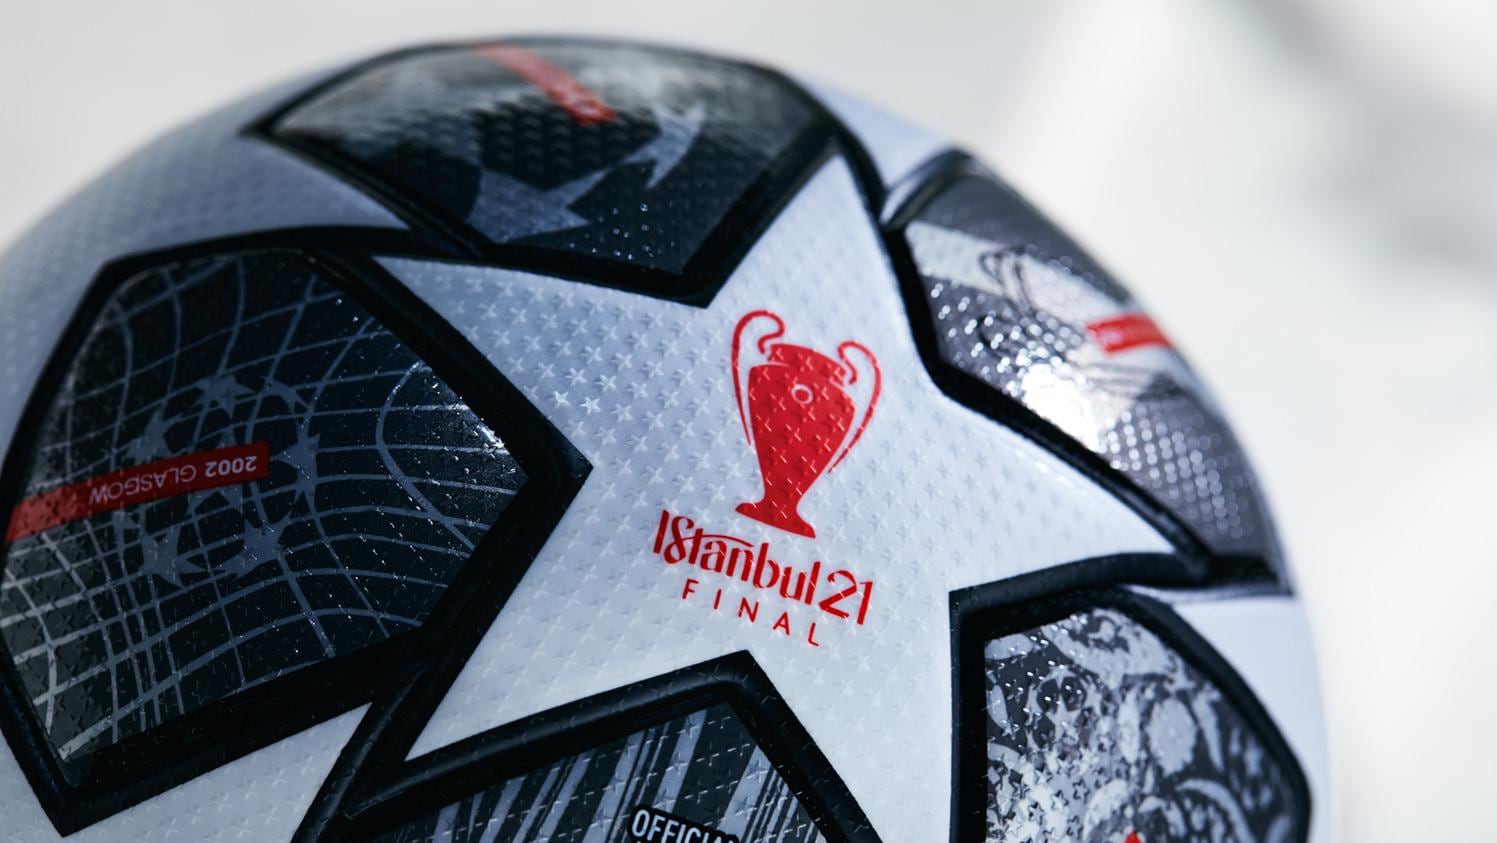 adidas reveals the official match ball for 2021 UEFA Champions League